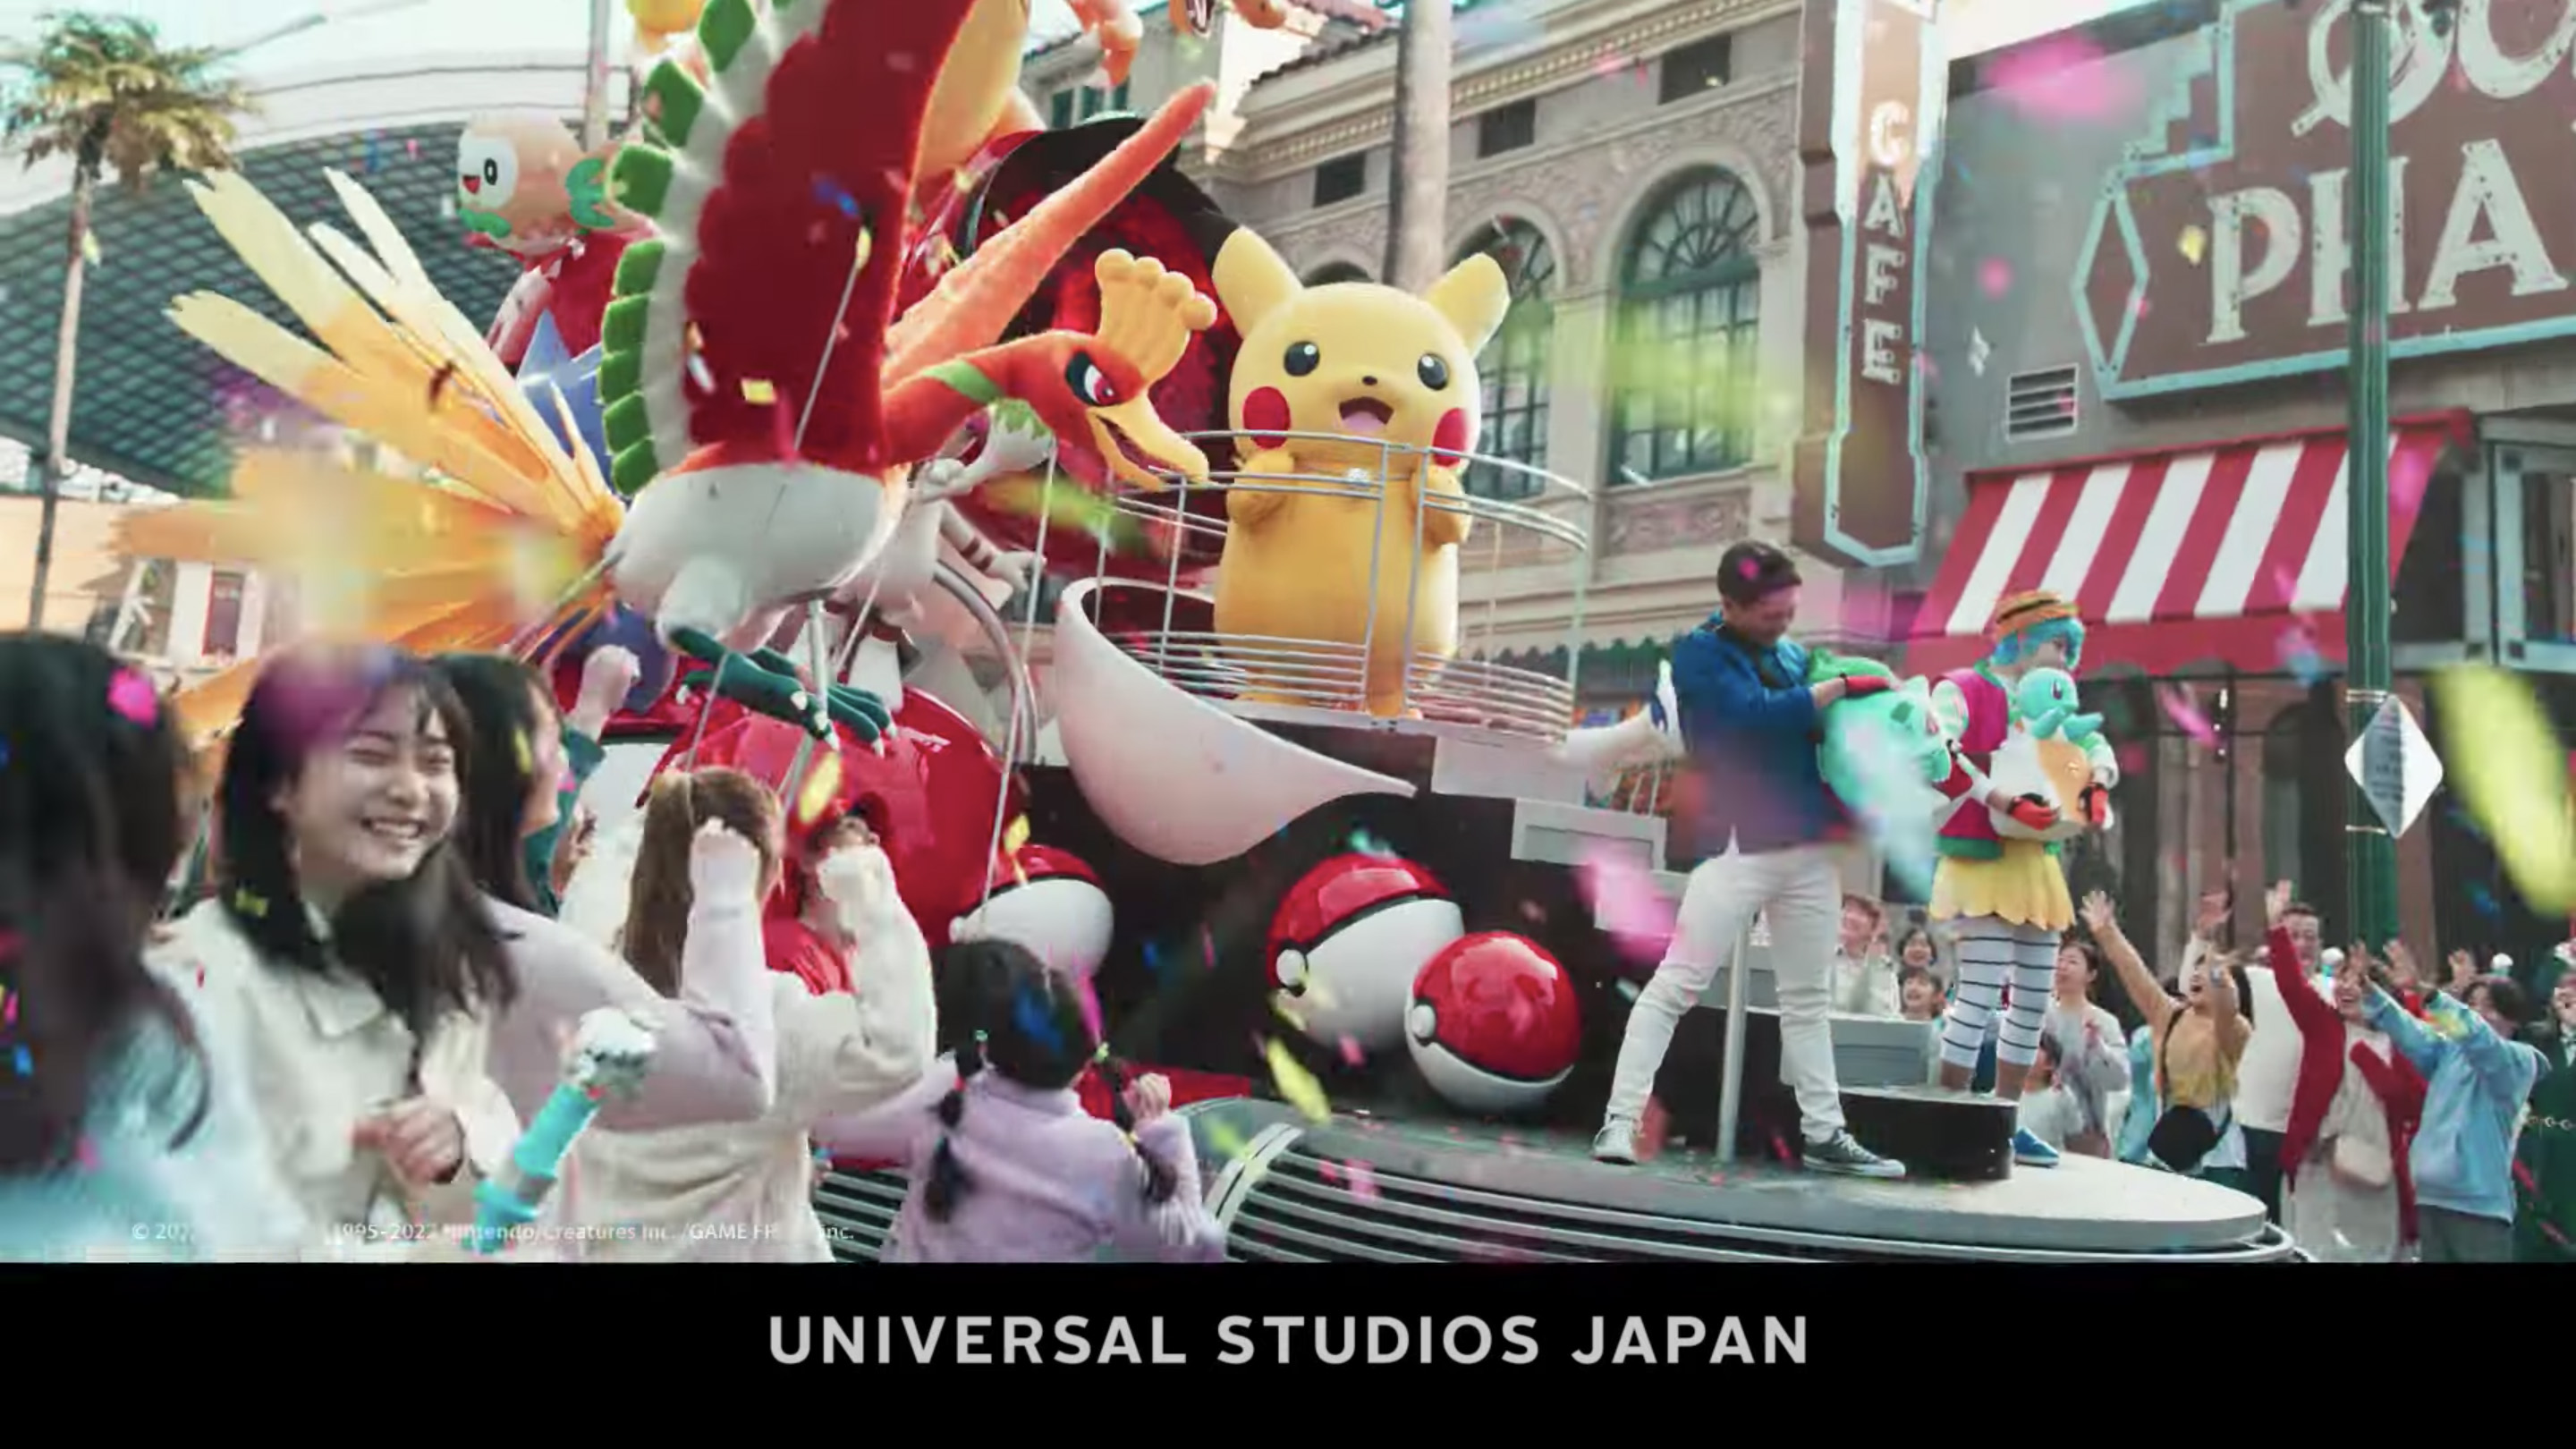 Mario and Pikachu to Parade Down Universal Studios Japan for First Time Ever